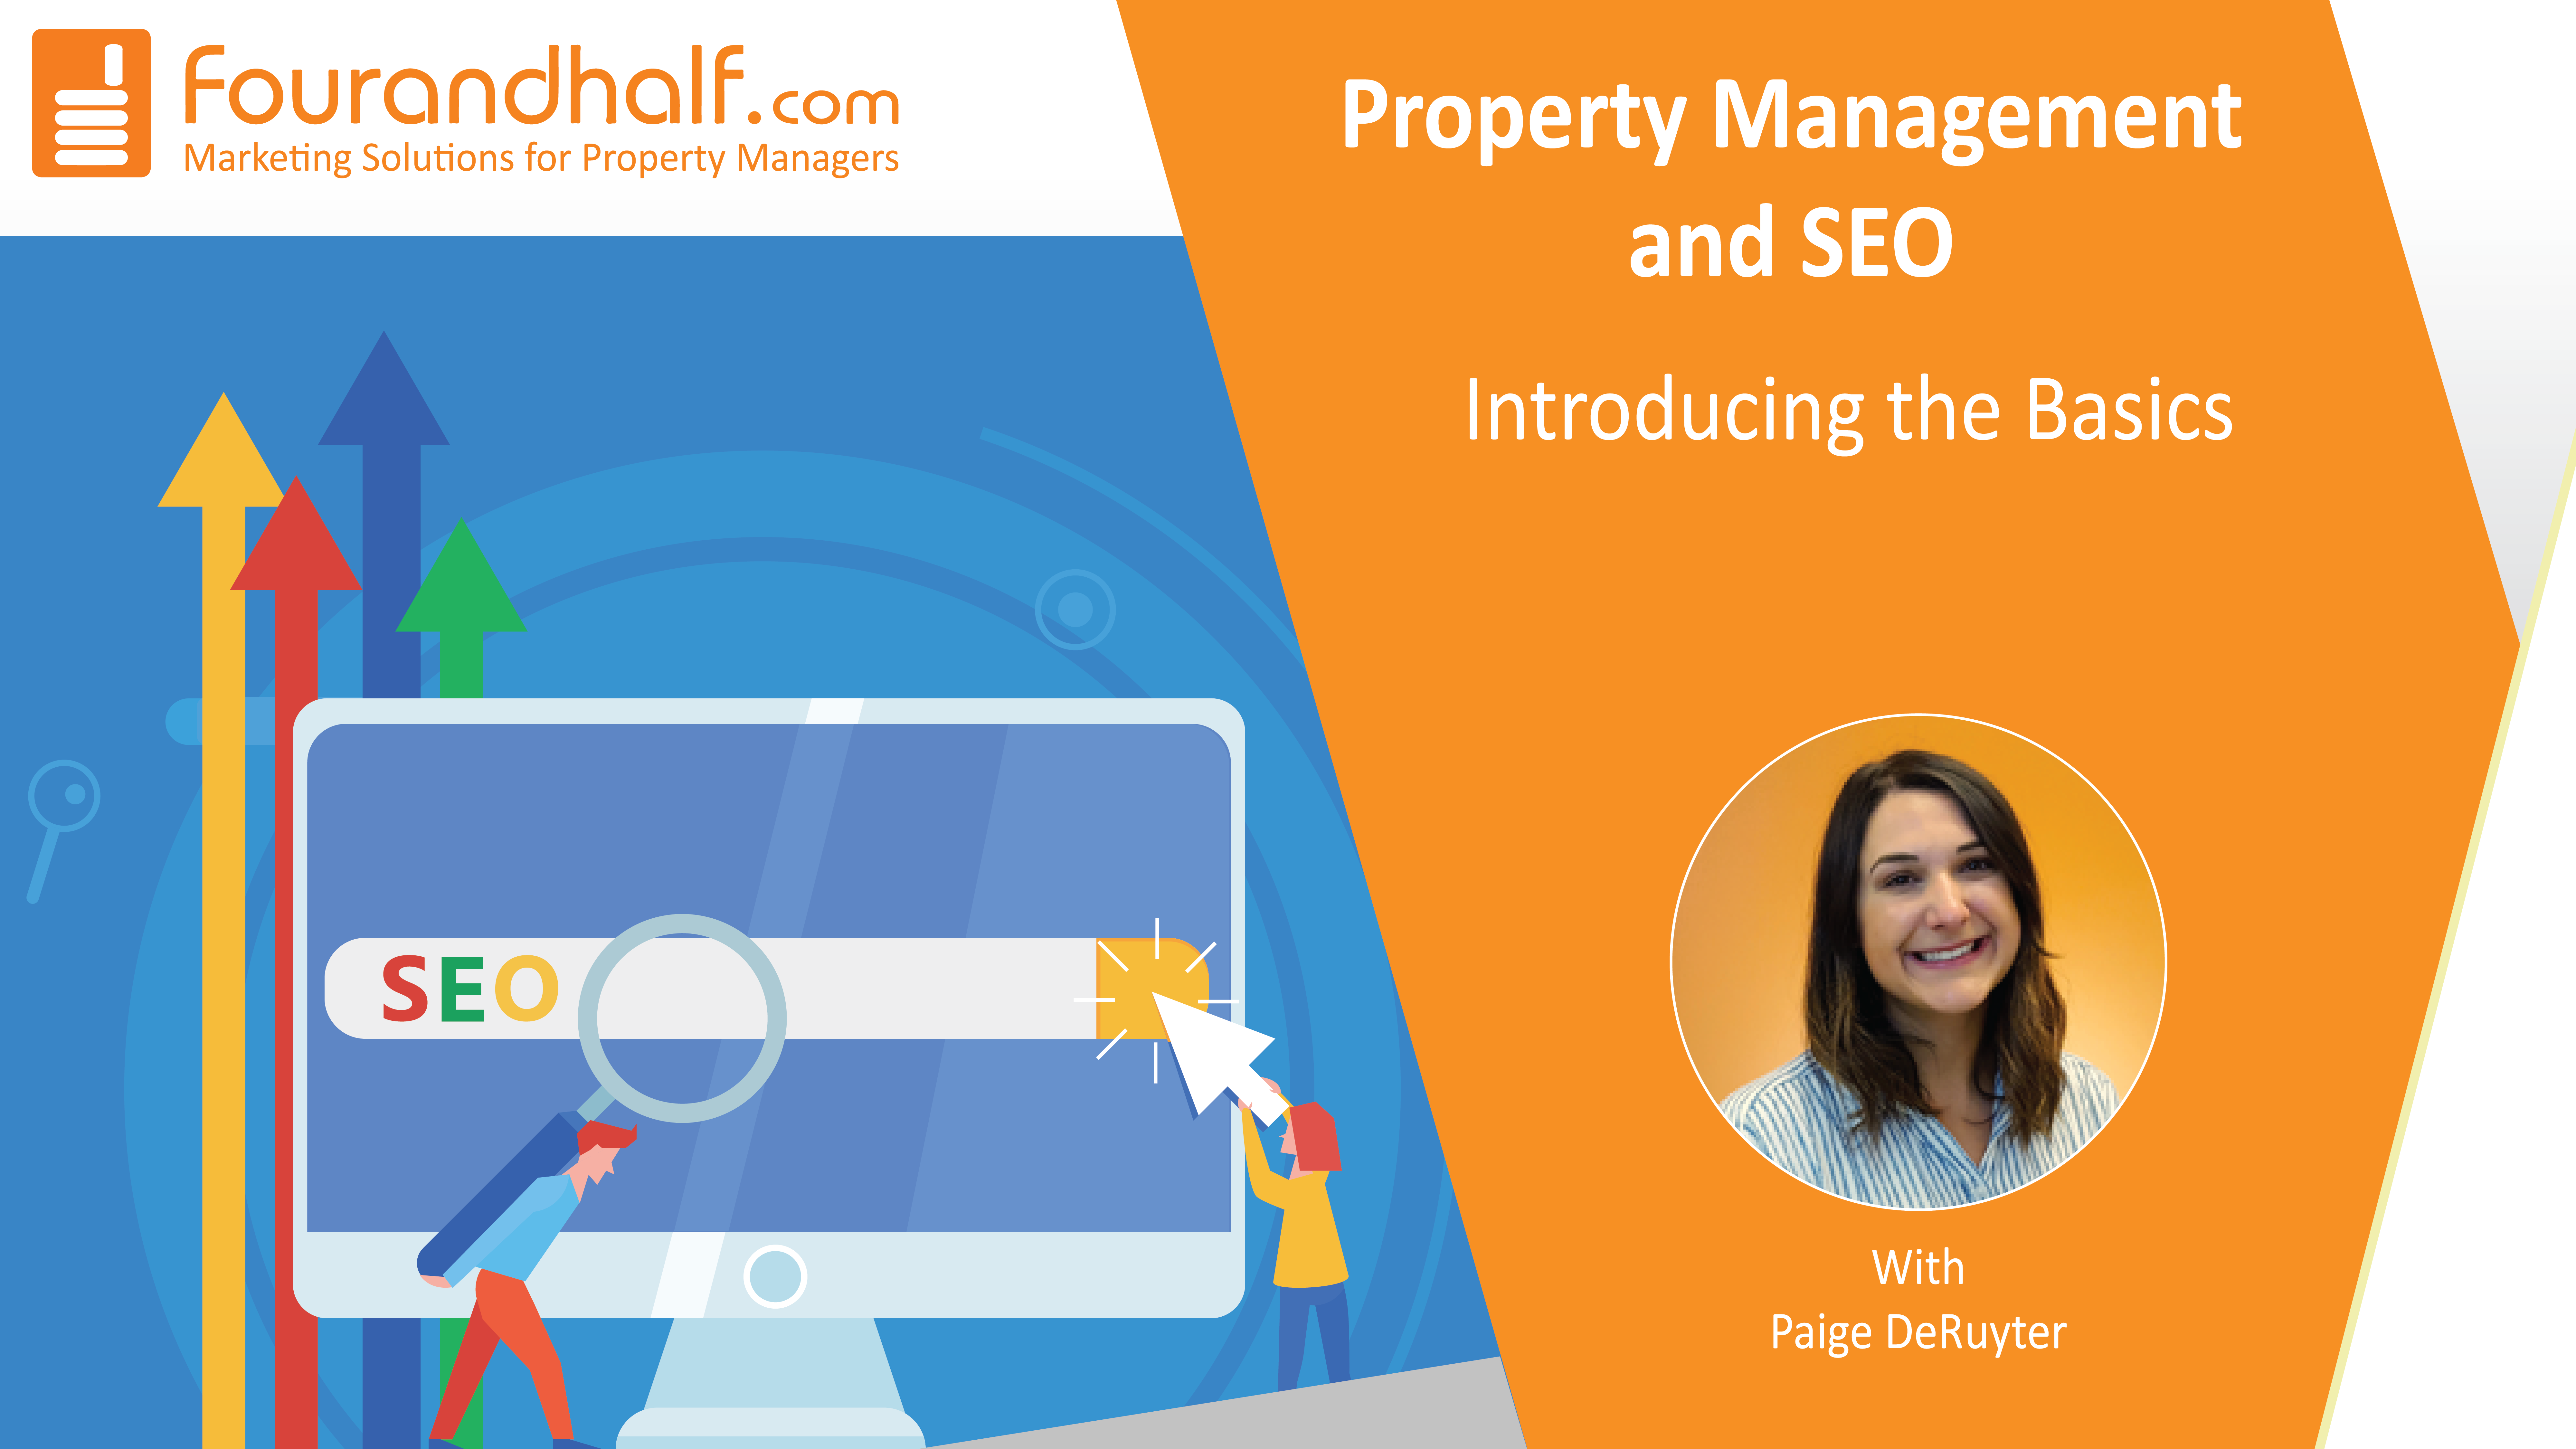 Property Management and SEO: Introducing the Basics